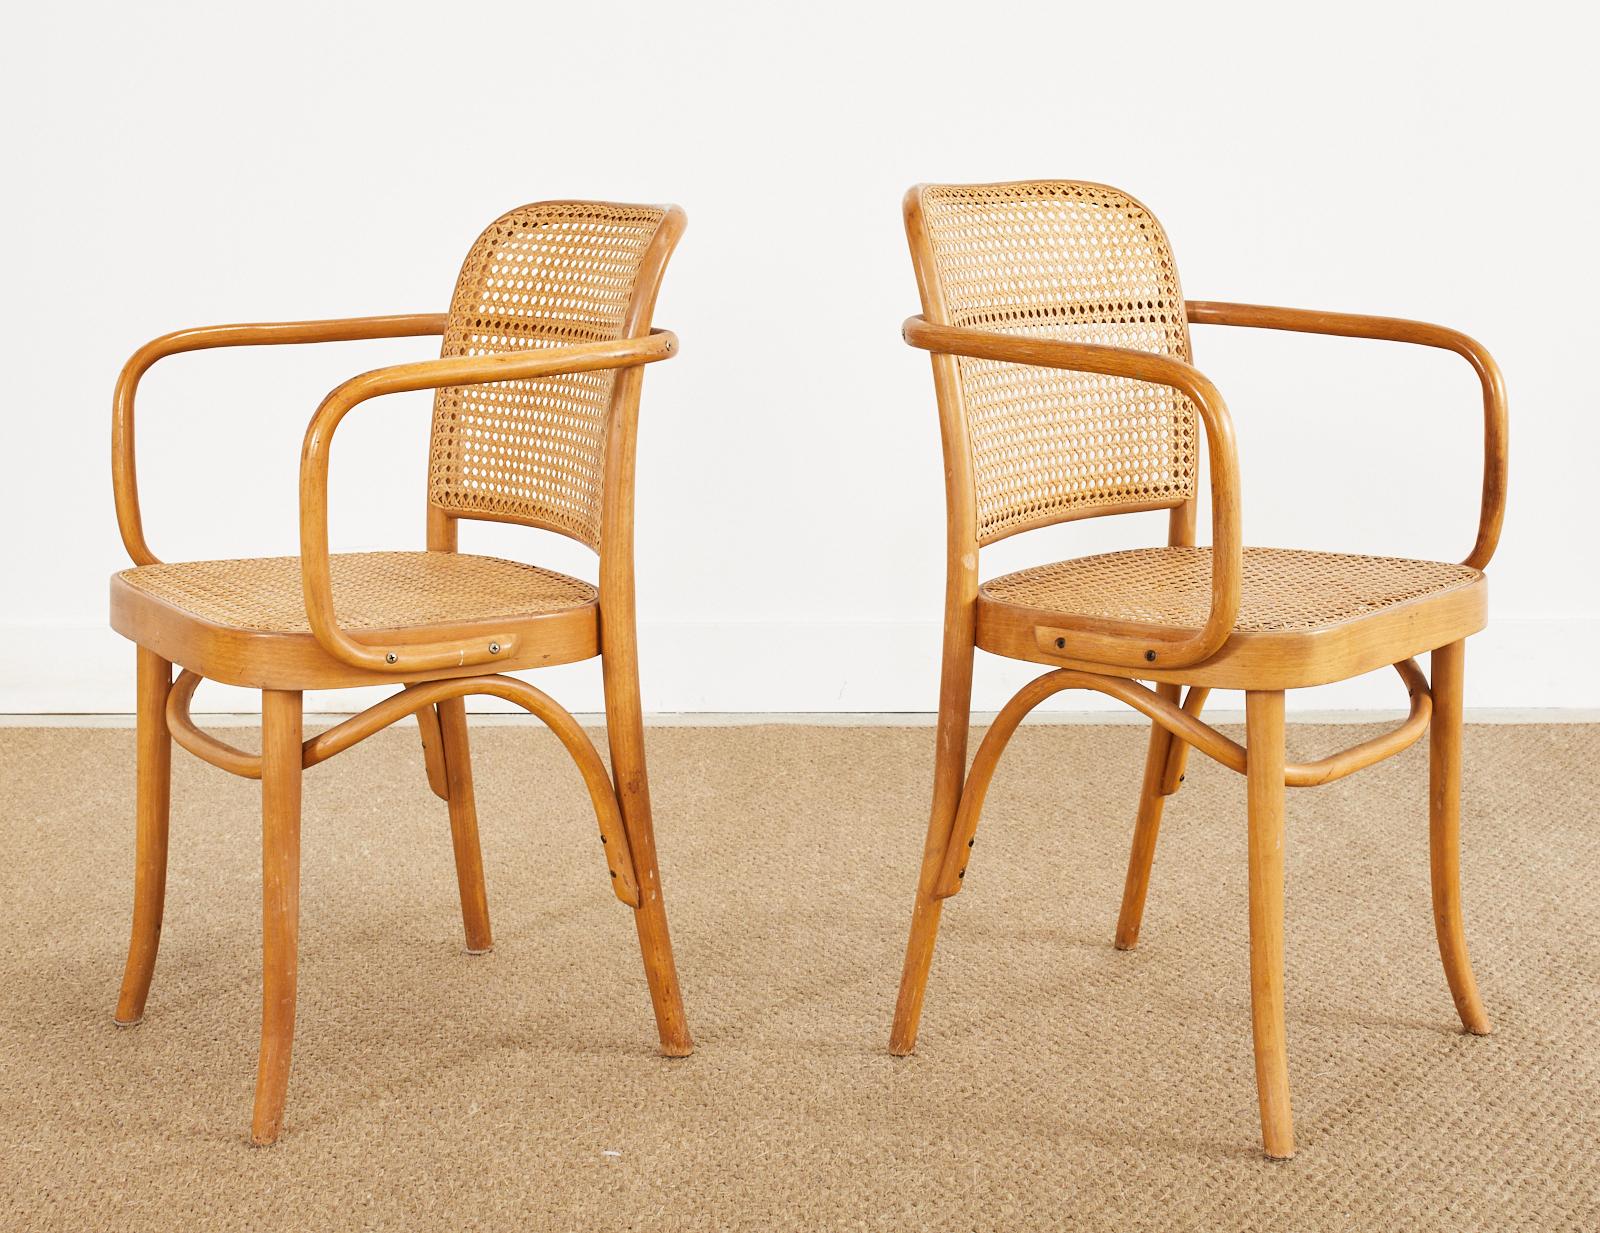 Set of Four Josef Frank/Hoffman Bentwood Prague 811 Chairs In Good Condition For Sale In Rio Vista, CA